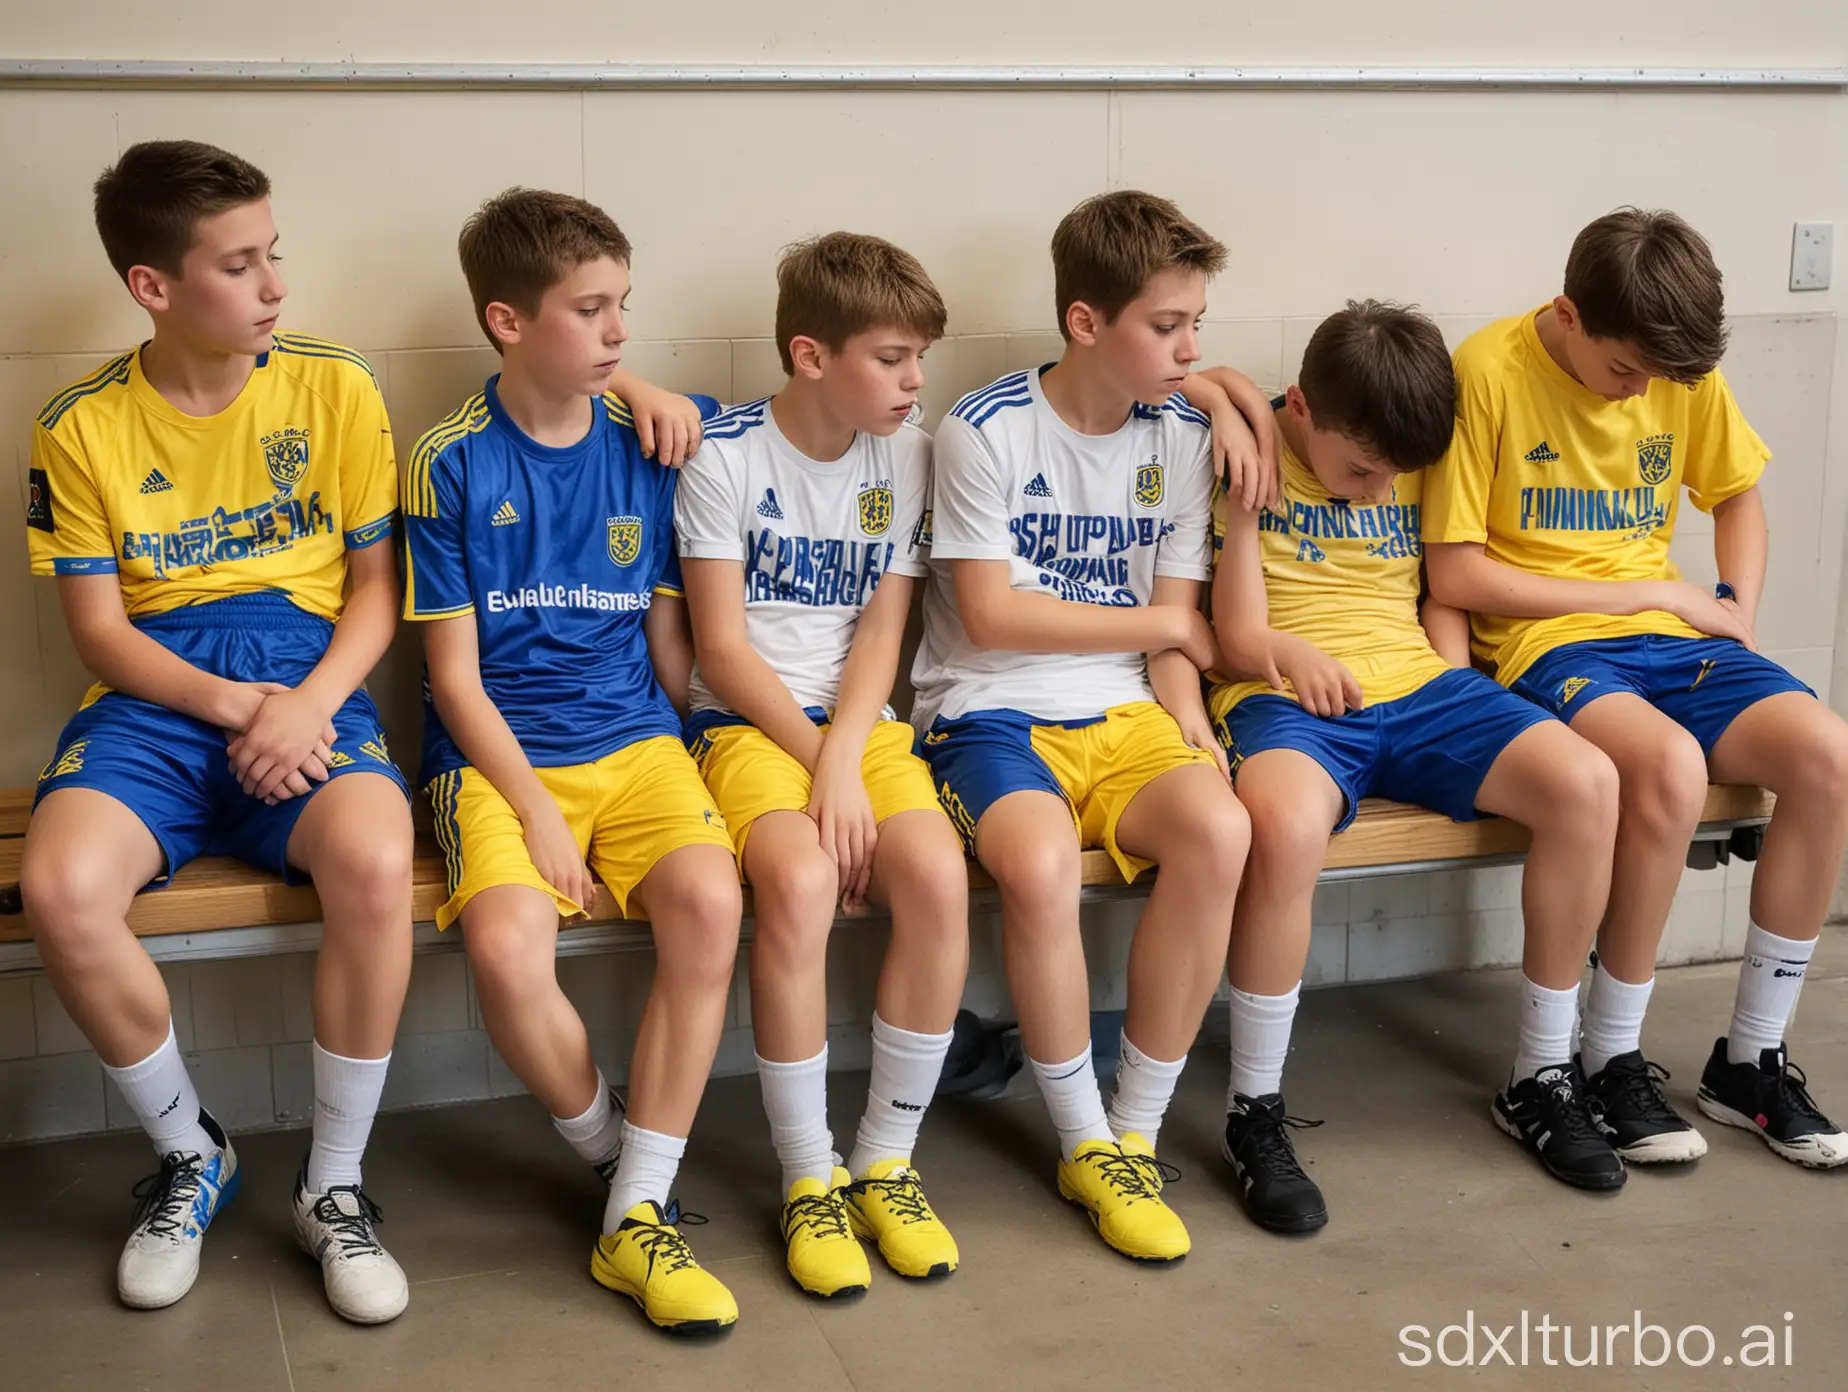 Four 13 year old boys dressed in yellow and blue shorts and tshirts slumped slouched asleep on the bench in a soccer changing room